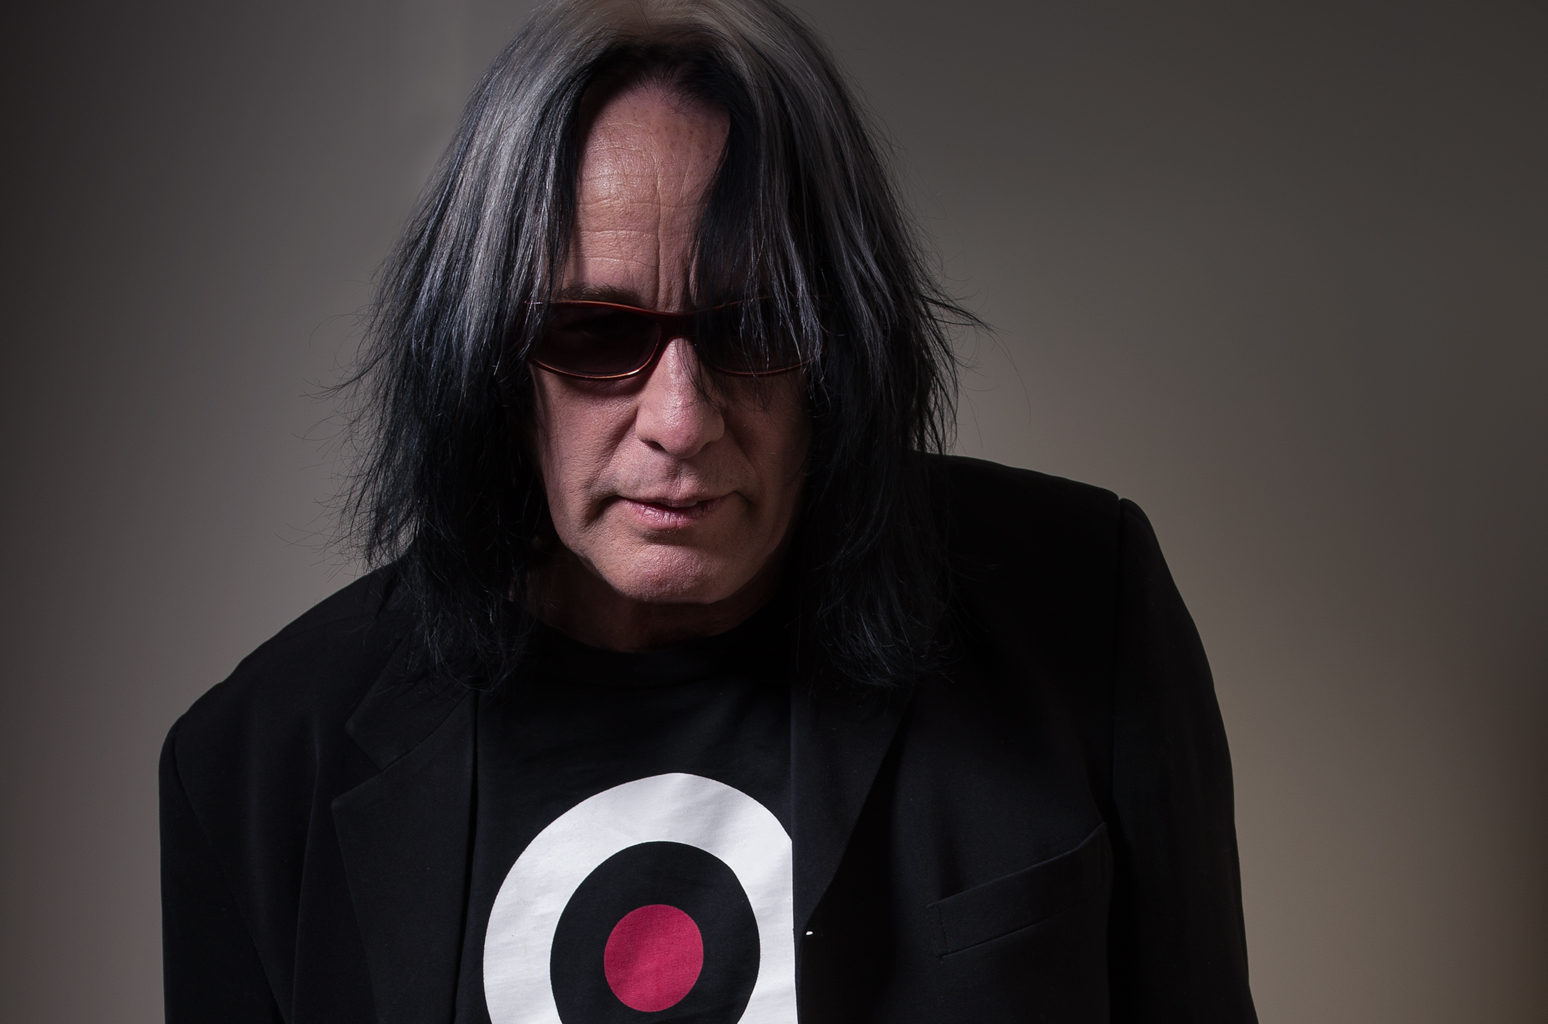 Interview: Todd Rundgren on New Memoir ‘The Individualist,’ Meatloaf, ‘Full House’ and More